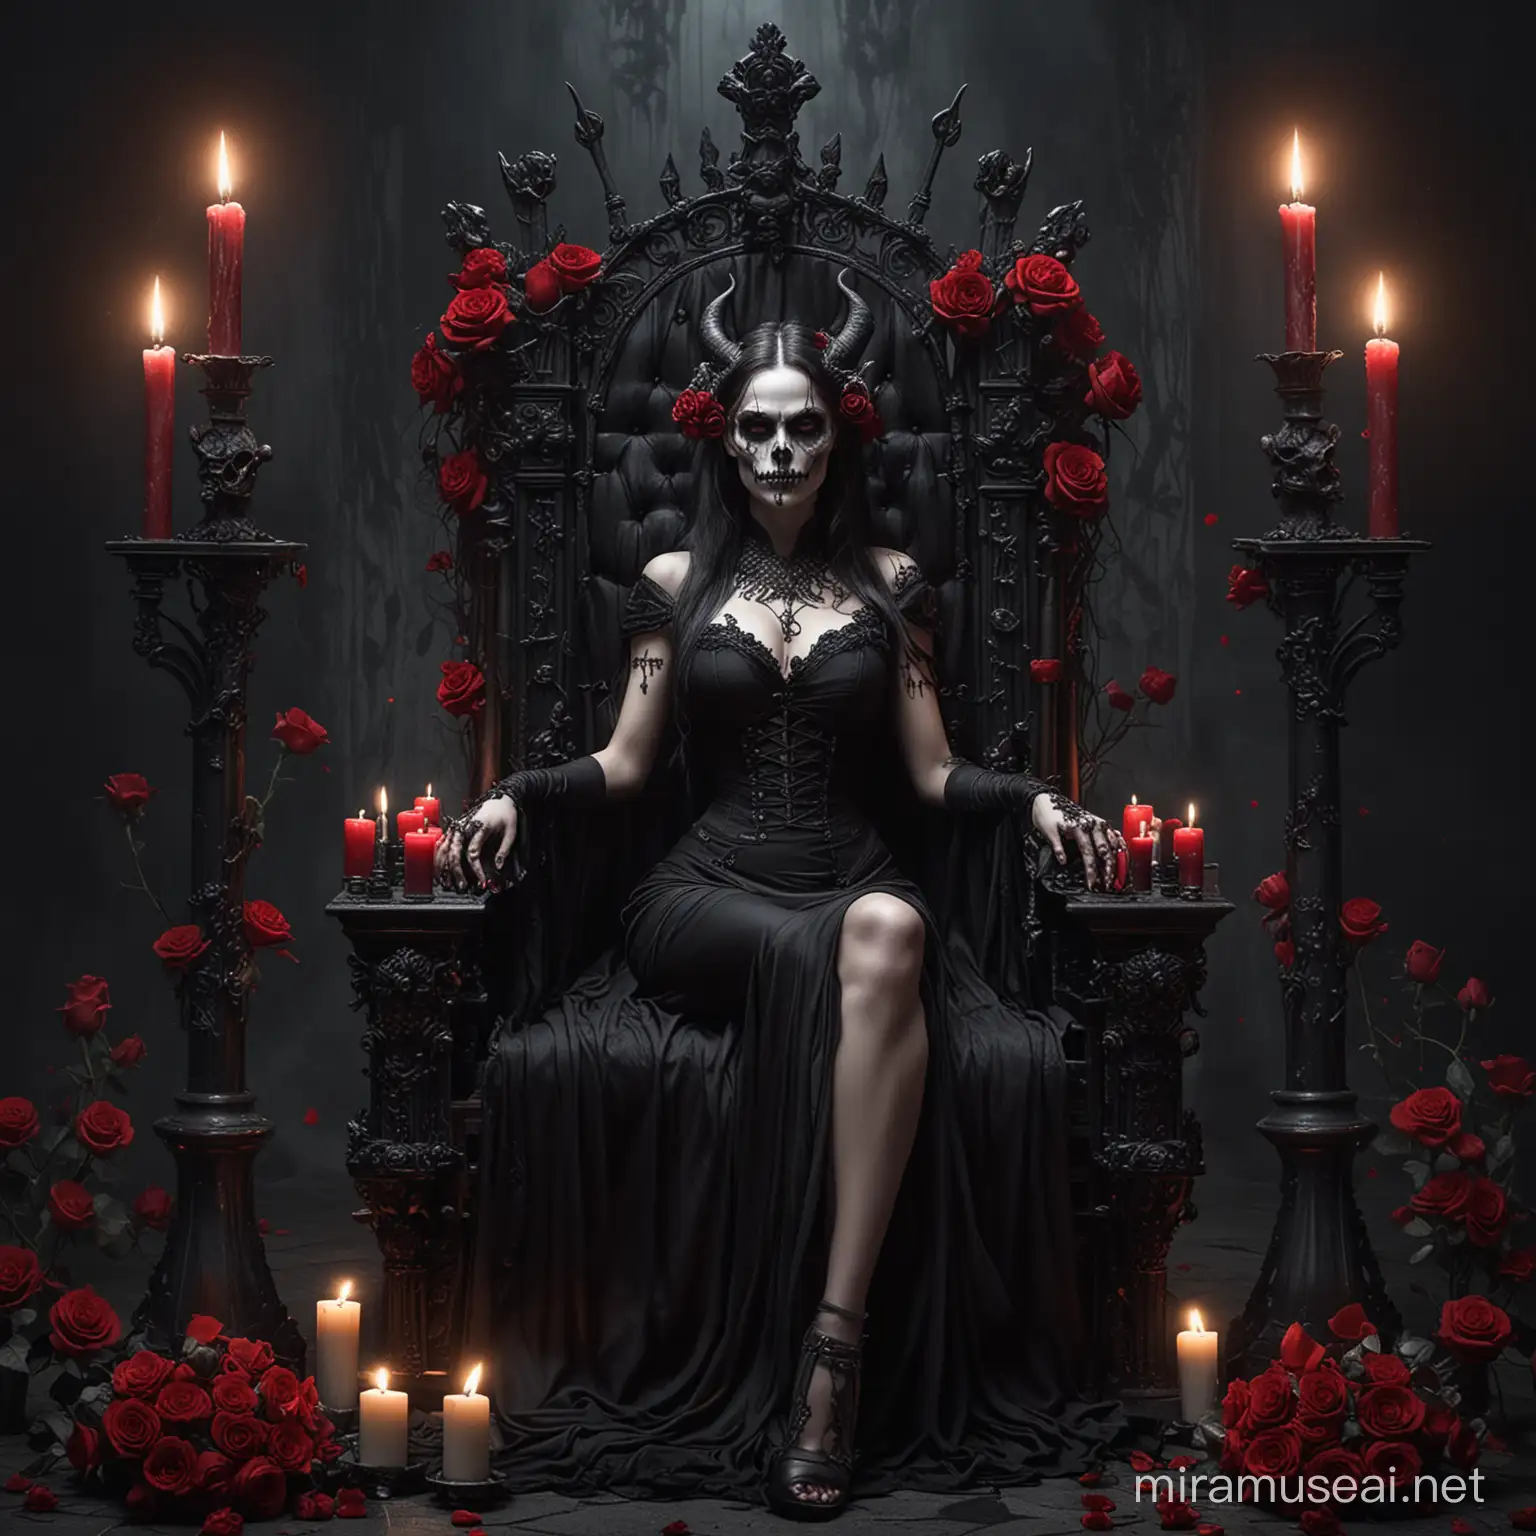 Gothic Demon Lady Surrounded by Skulls and Roses in Dark Throne Room with Candles